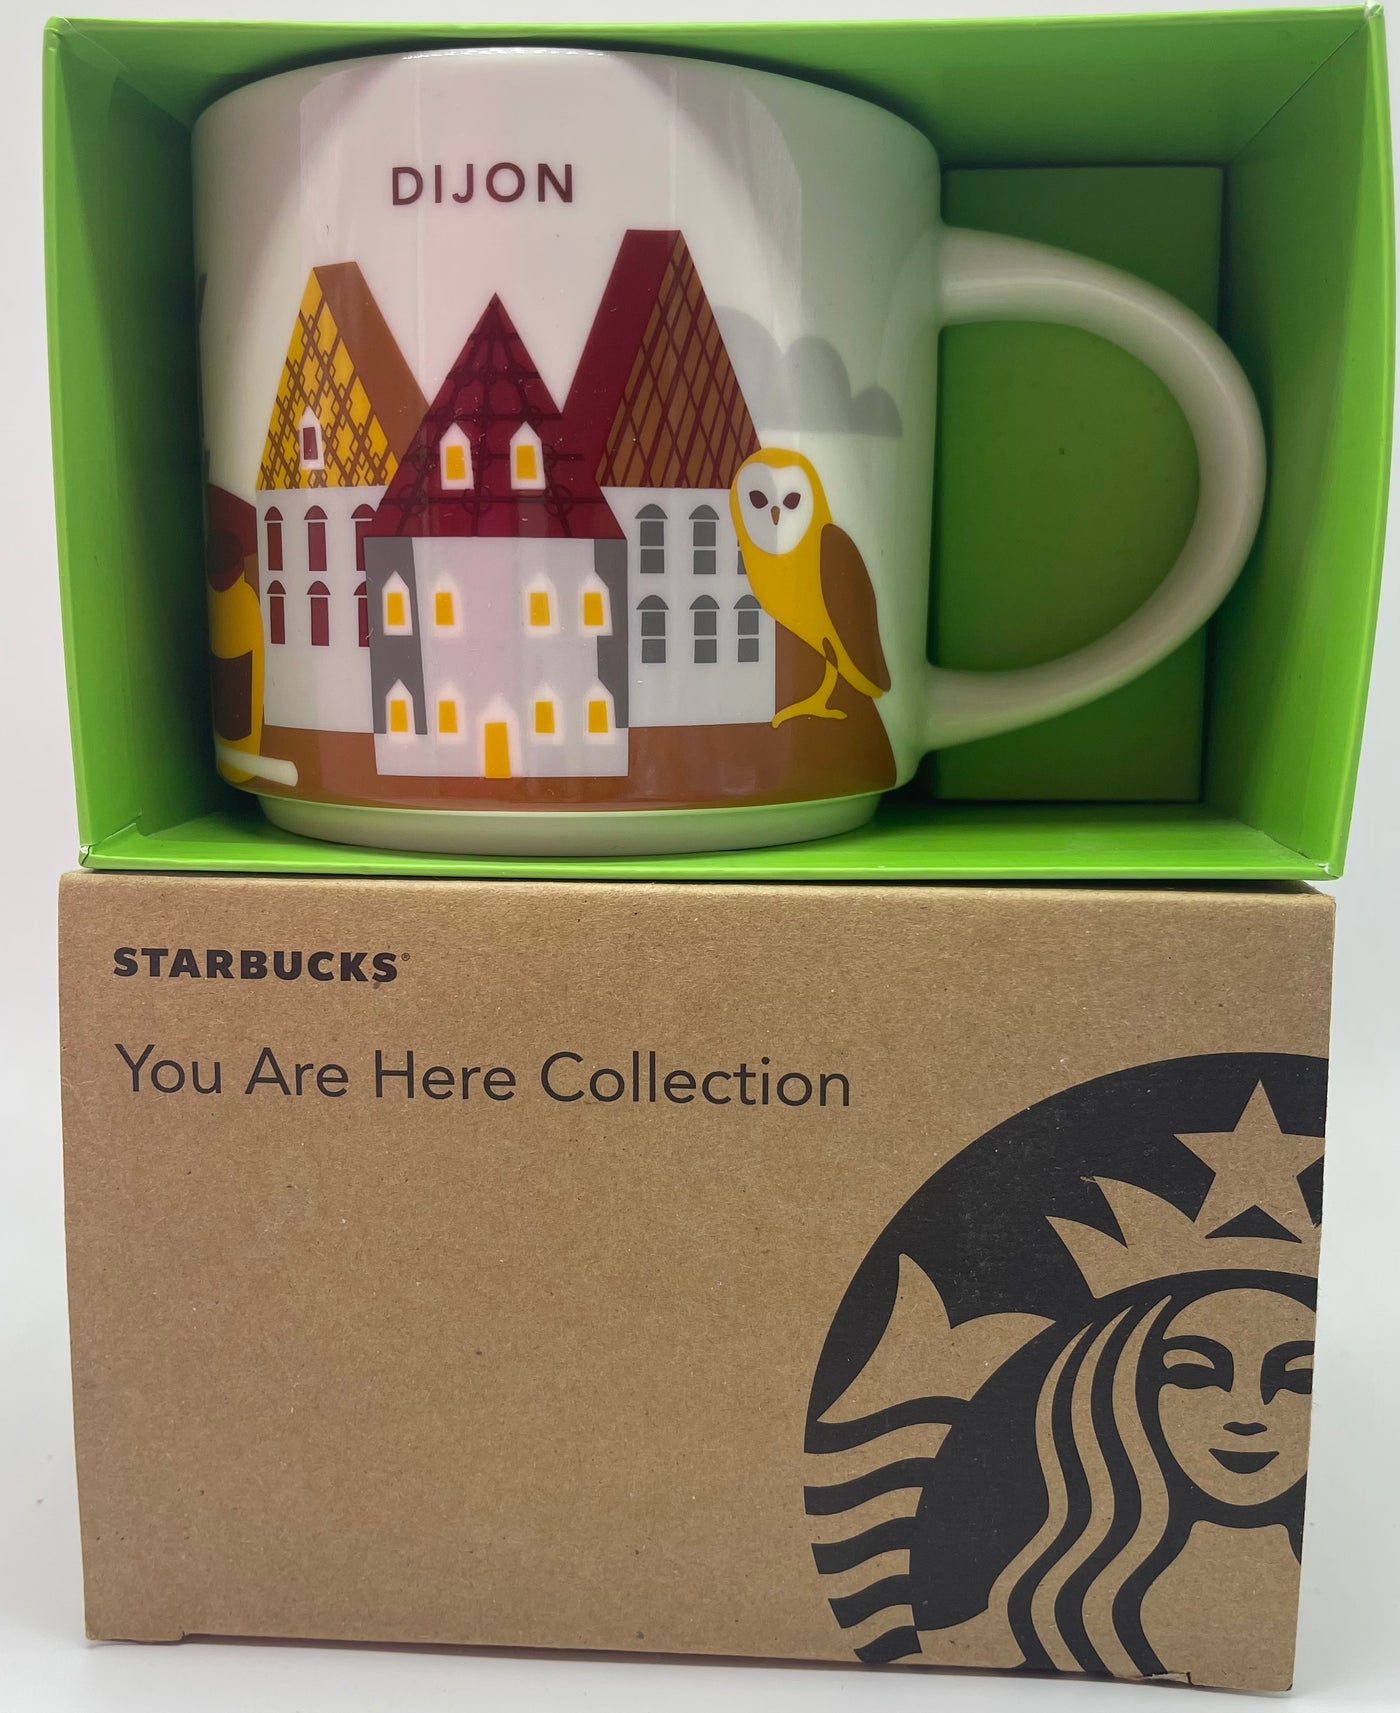 Starbucks You Are Here Collection Dijon France Ceramic Coffee Mug New with Box